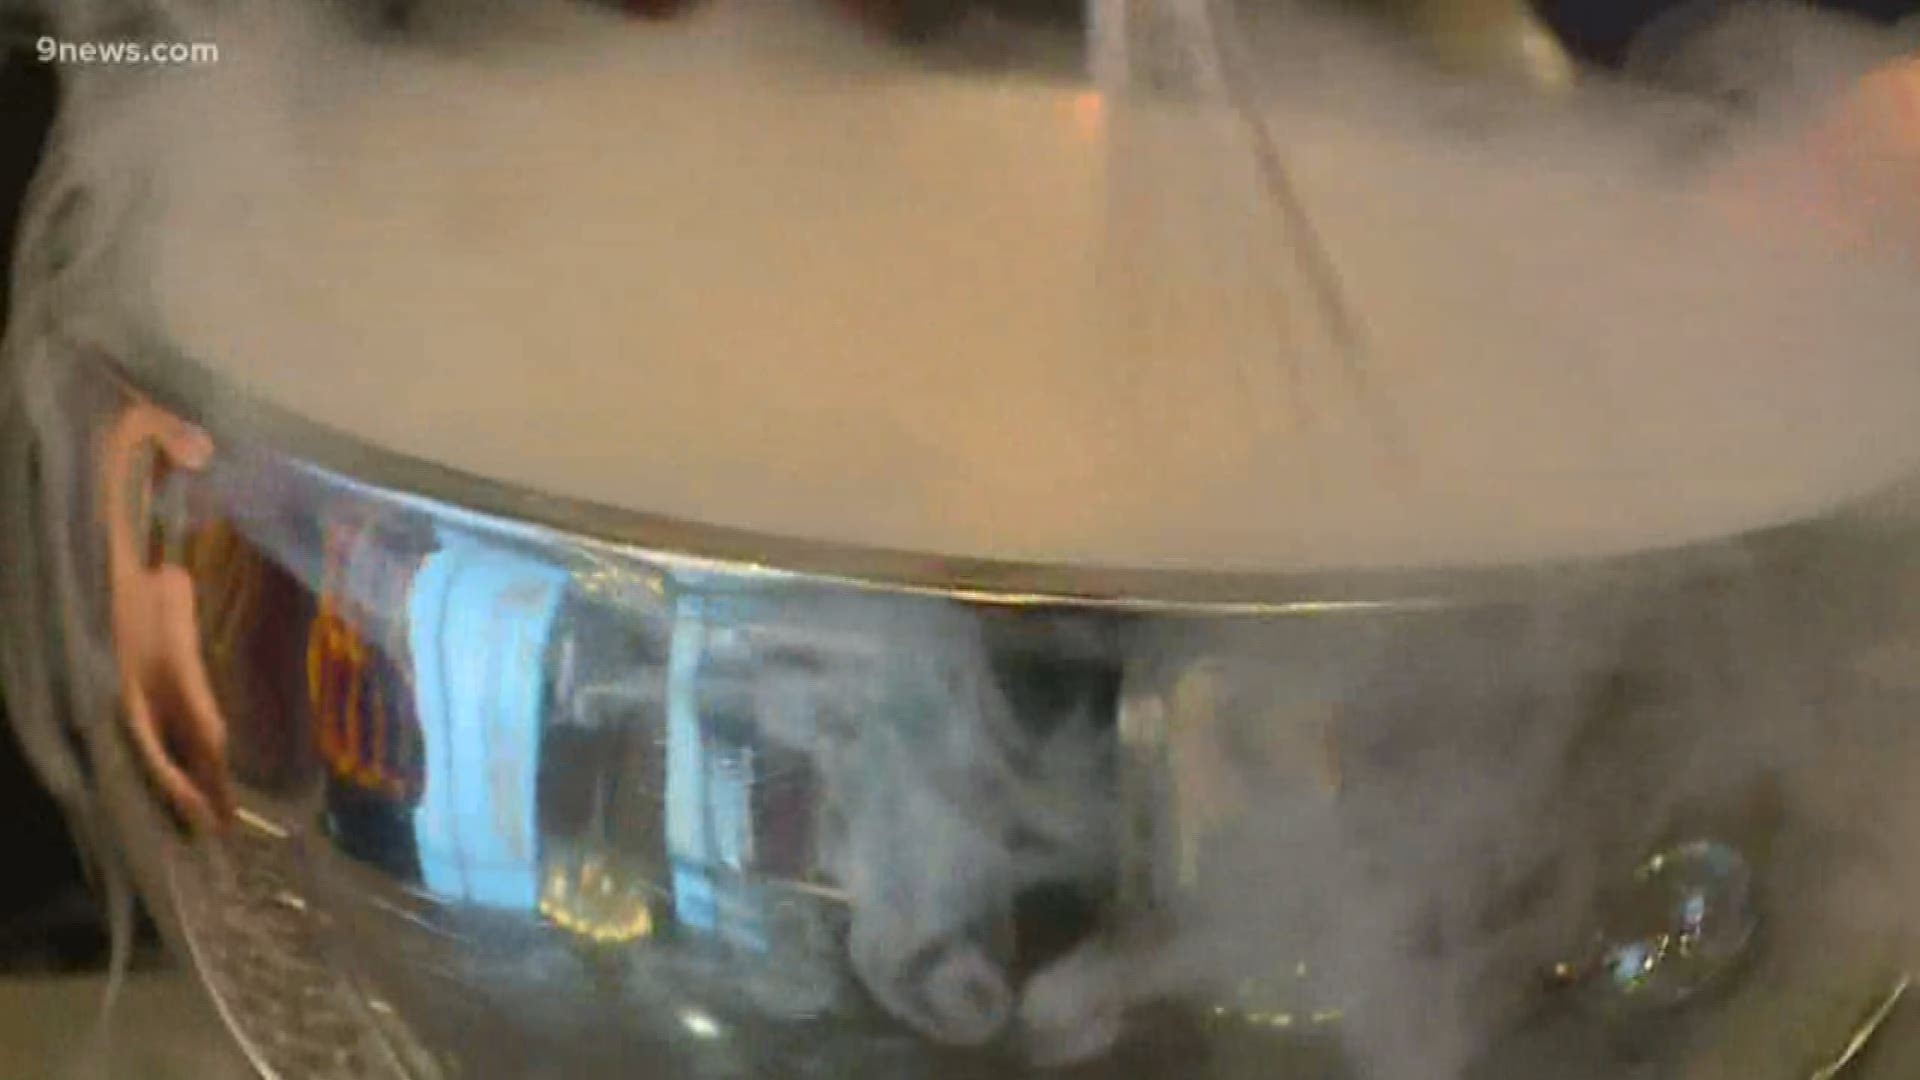 The Welton Room in Five Points offers cocktails made with the very frigid liquid nitrogen gas.